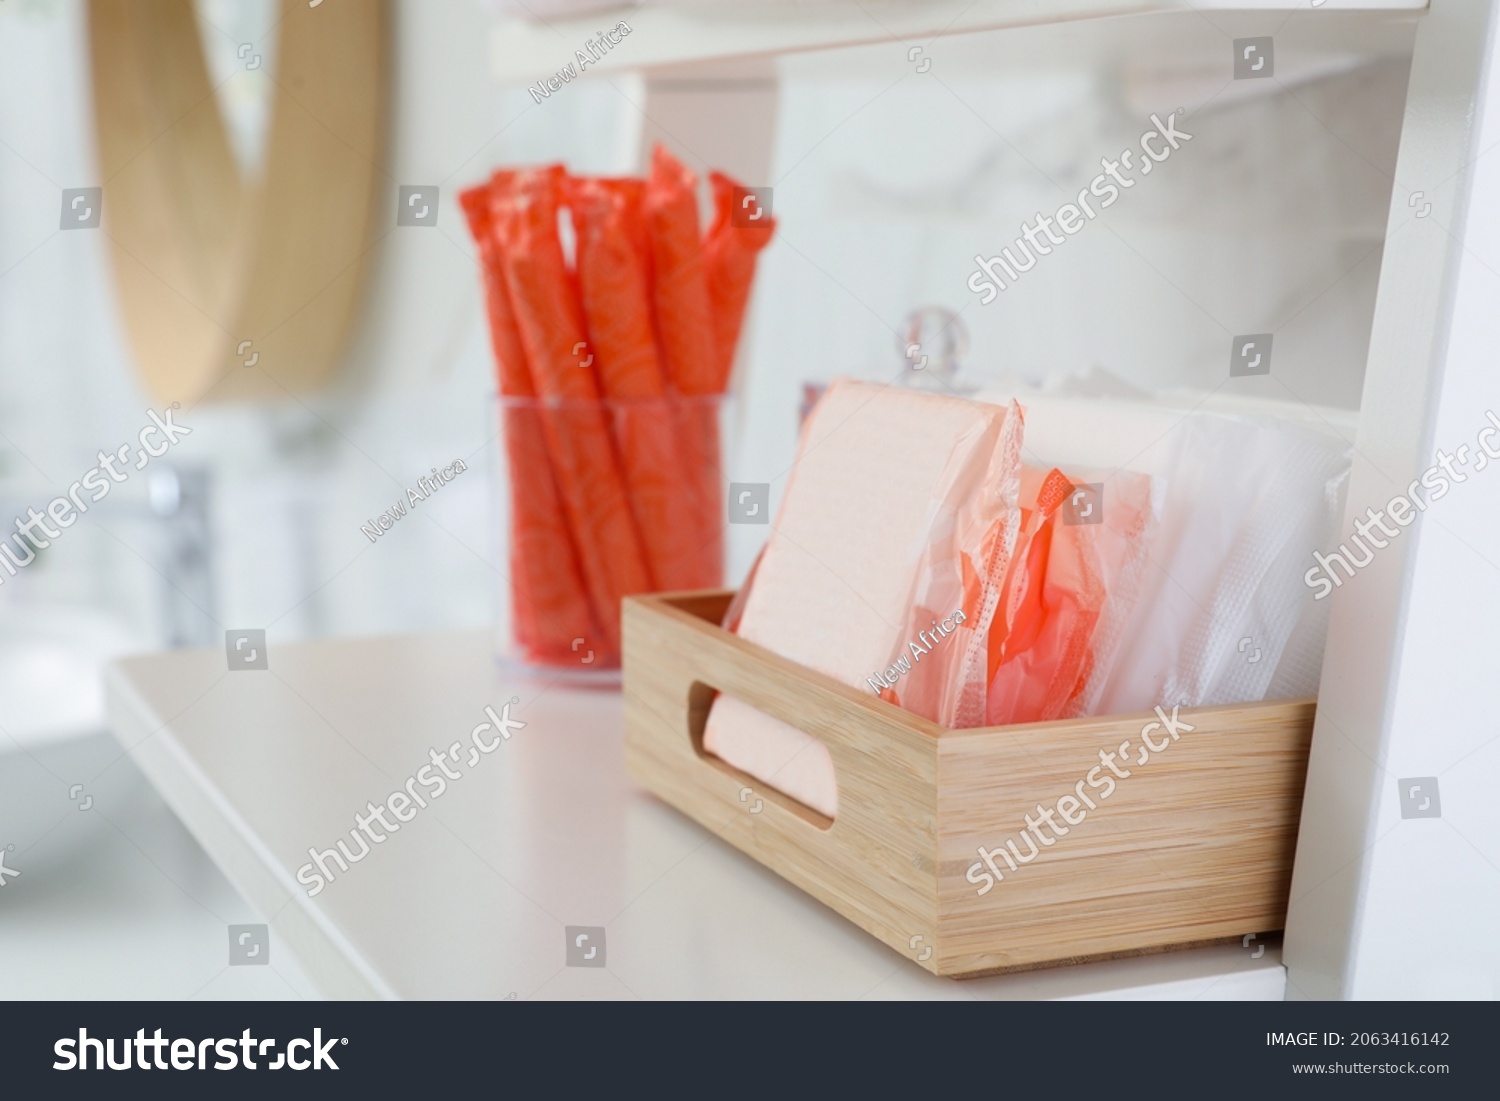 Organizer with tampons and menstrual pads on shelving unit in bathroom. Feminine hygiene products #2063416142